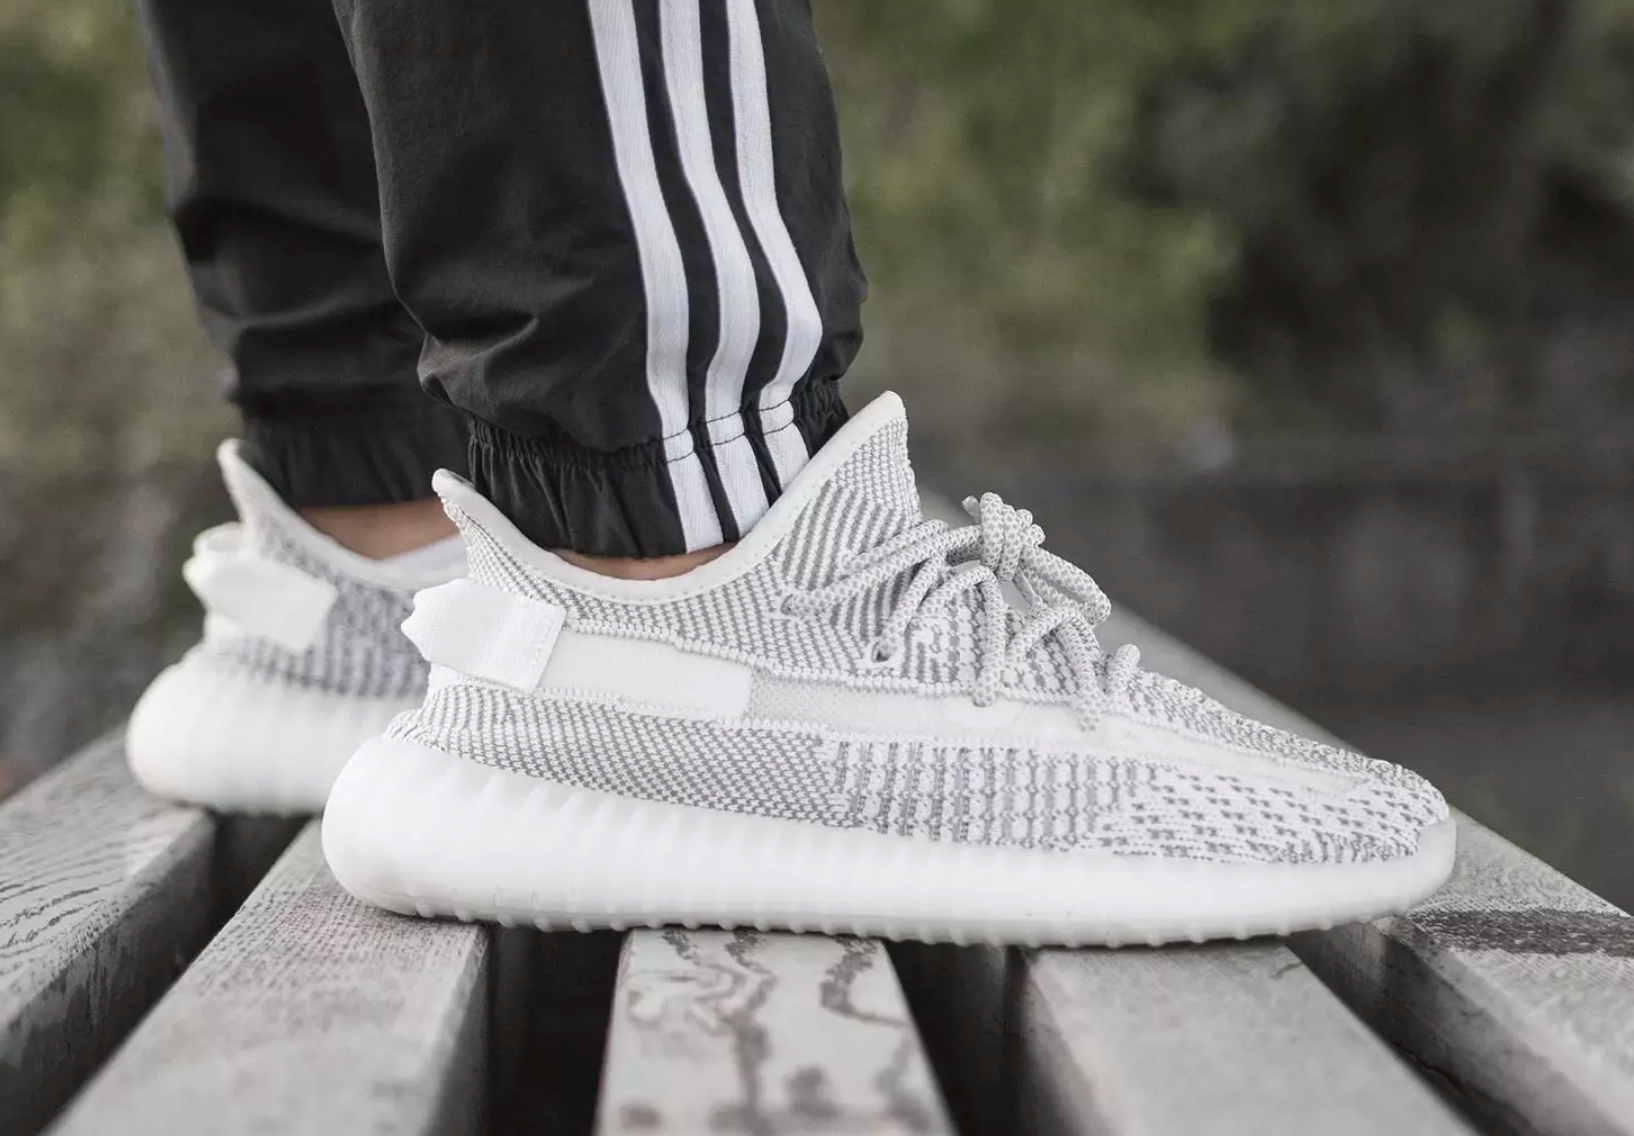 YEEZY-Free adidas 350s Are (Possibly) Coming Soon